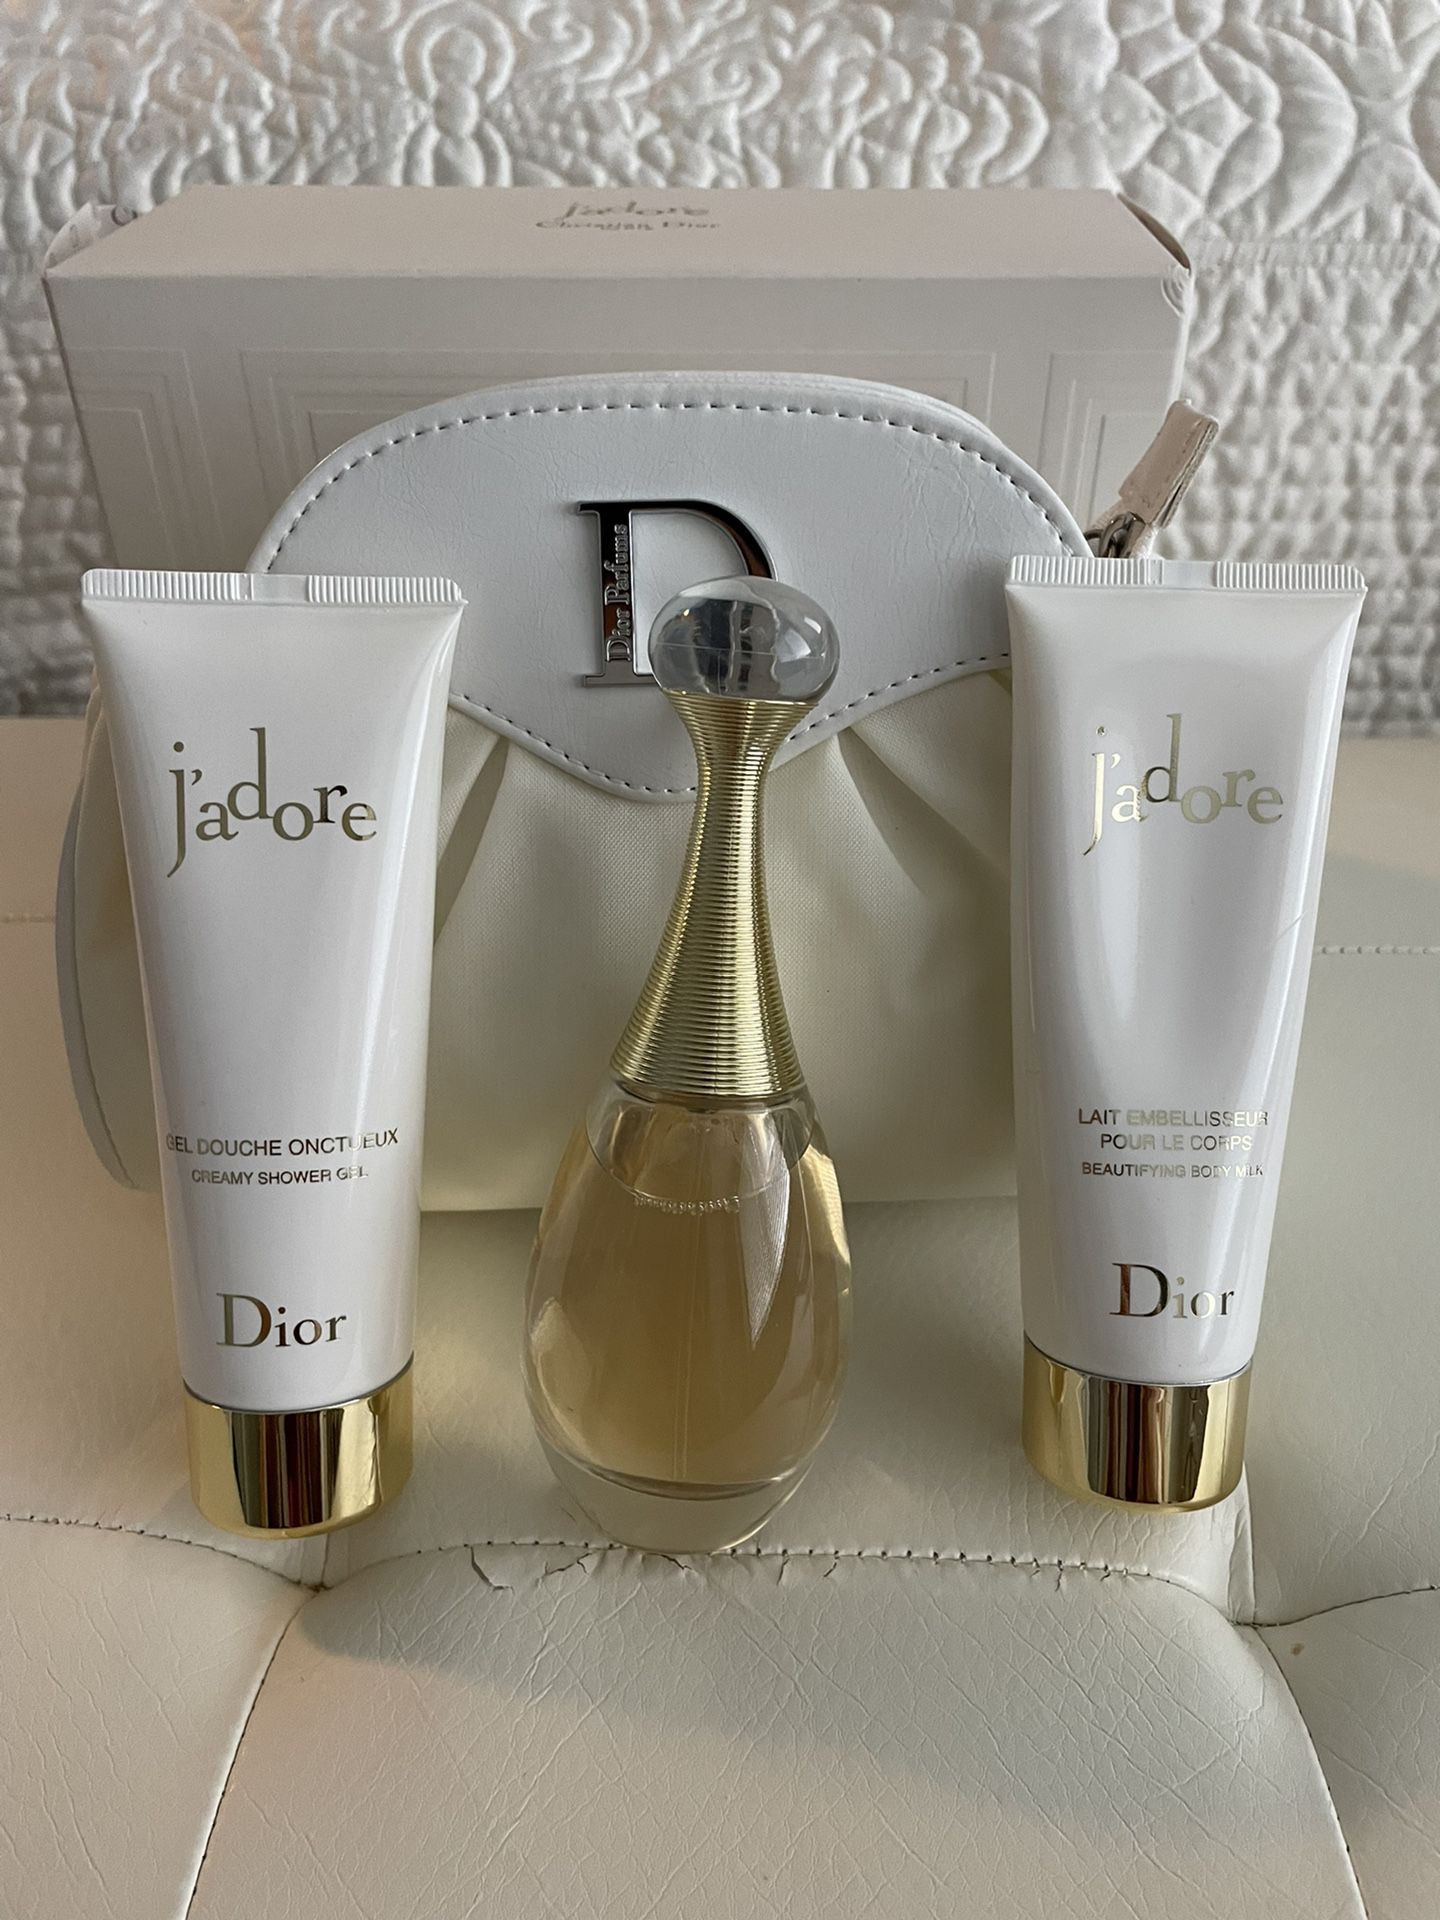 Jadore By Christian Dior Women Set With Dior Cosmetic Bag